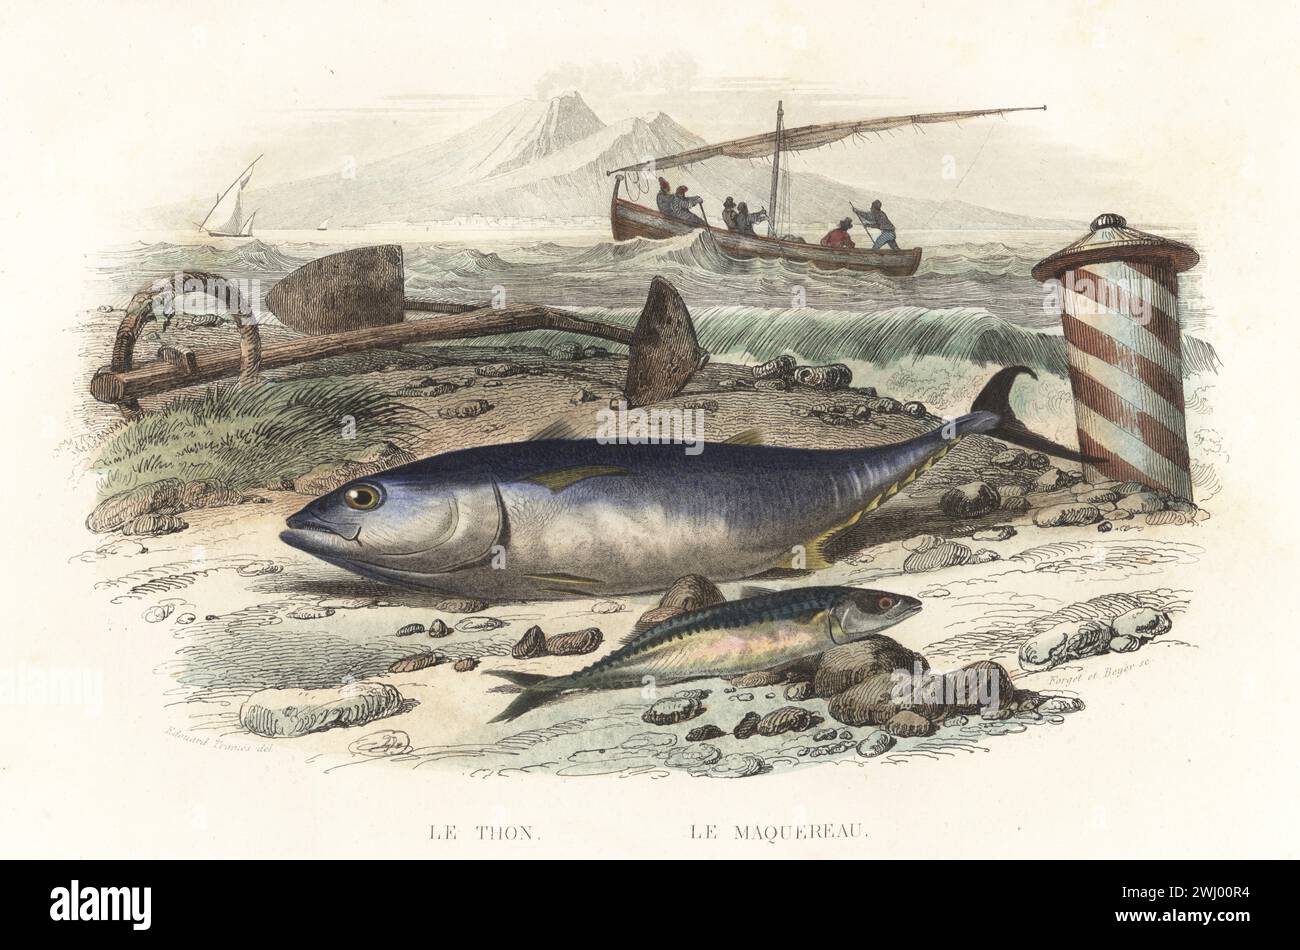 Atlantic bluefin tuna, Thunnus thynnus, and Atlantic mackerel, Scomber scombrus, on the shore line near an anchor and bollard. Fishermen rowing a sailboat on the waves. Le Thon, le Maquereau. Handcoloured steel engraving by Forget and Charles Beyer after an illustration by Edouard Travies from Bernard Germain de Lacepede’s Histoire Naturelle de Lacepede, comprenant les cetaces, les quadrupedes ovipares, les serpents et les poissons, Furne et Cie, Paris, 1847. Stock Photo